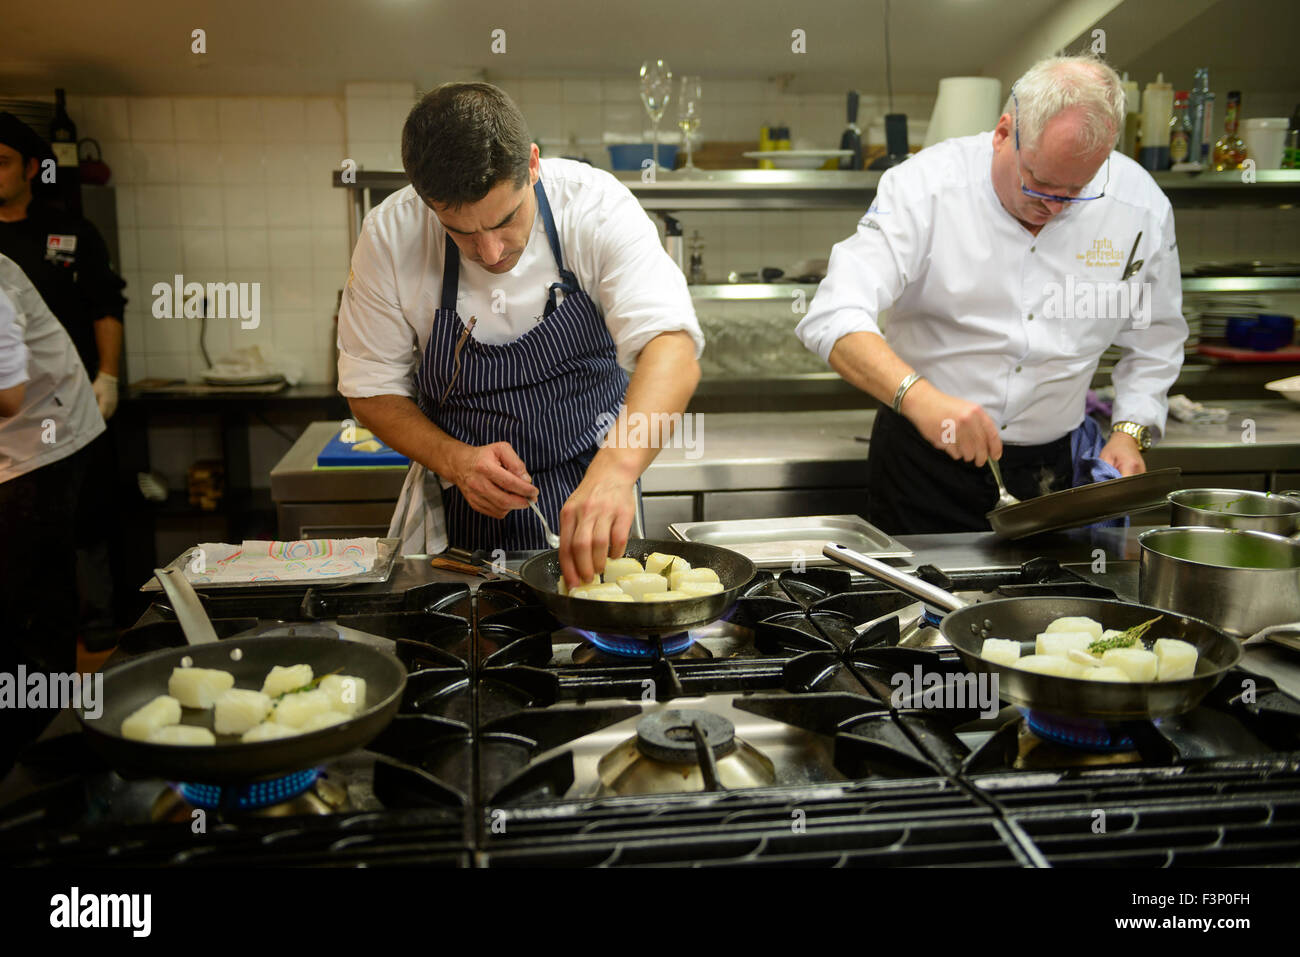 Portuguese chef Ricardo Costa and Austrian chef Dieter Koschina frying fish on a professional kitchen Stock Photo